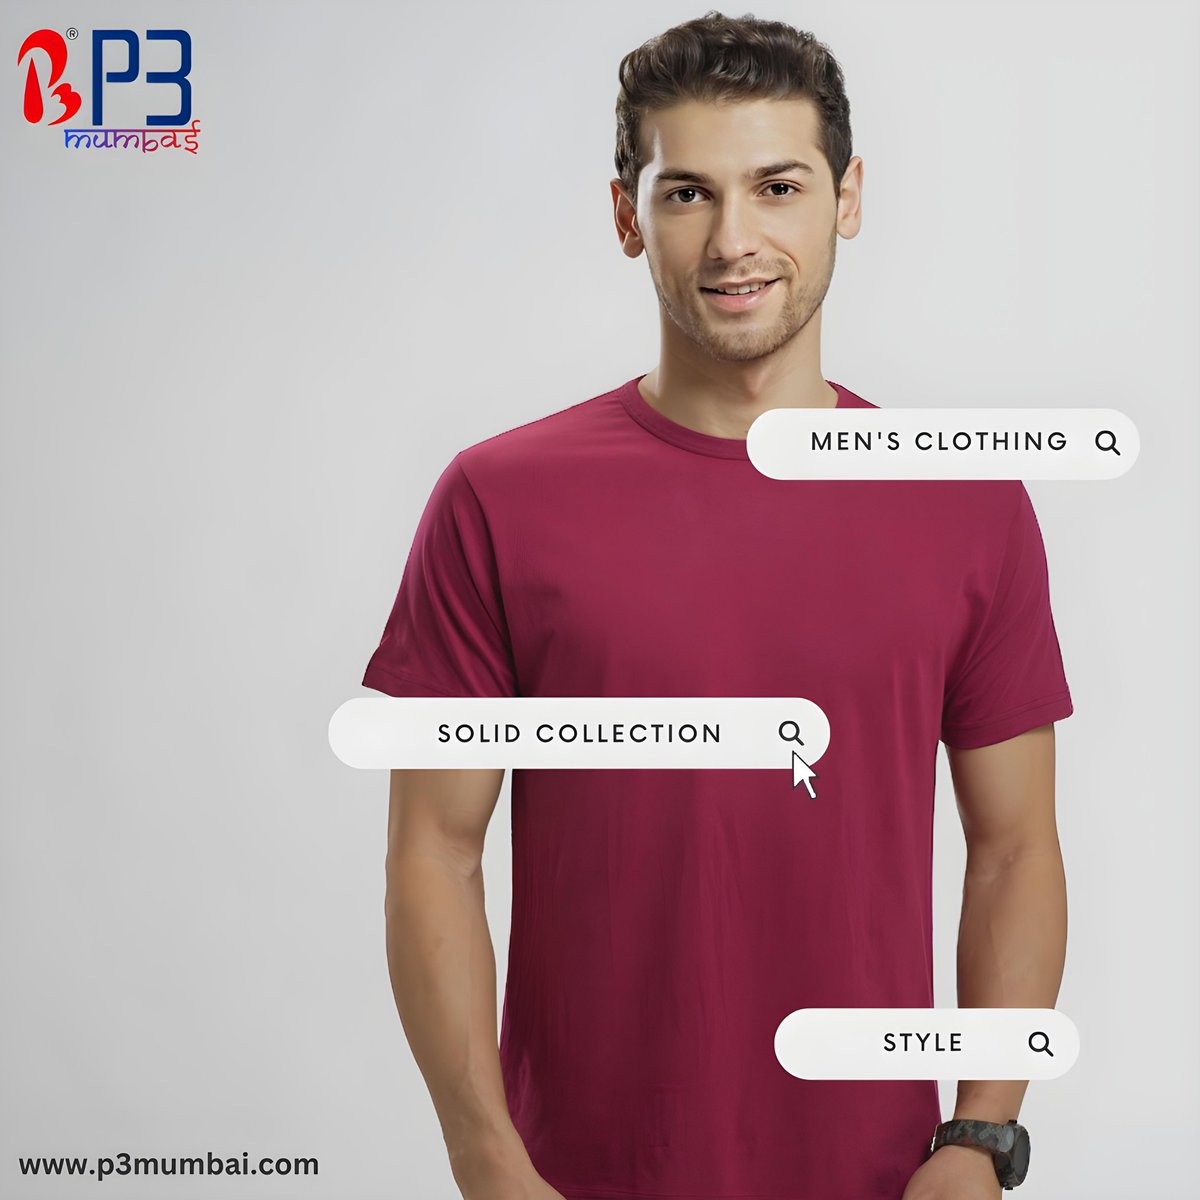 Elevate your style with the ultimate comfort of 100% cotton perfection from P3 Mumbai. Our solid plain tees for men are here to redefine your everyday look. Experience luxury in simplicity. 
#P3Mumbai #CottonEssentials #foryou #shopping #Clothing